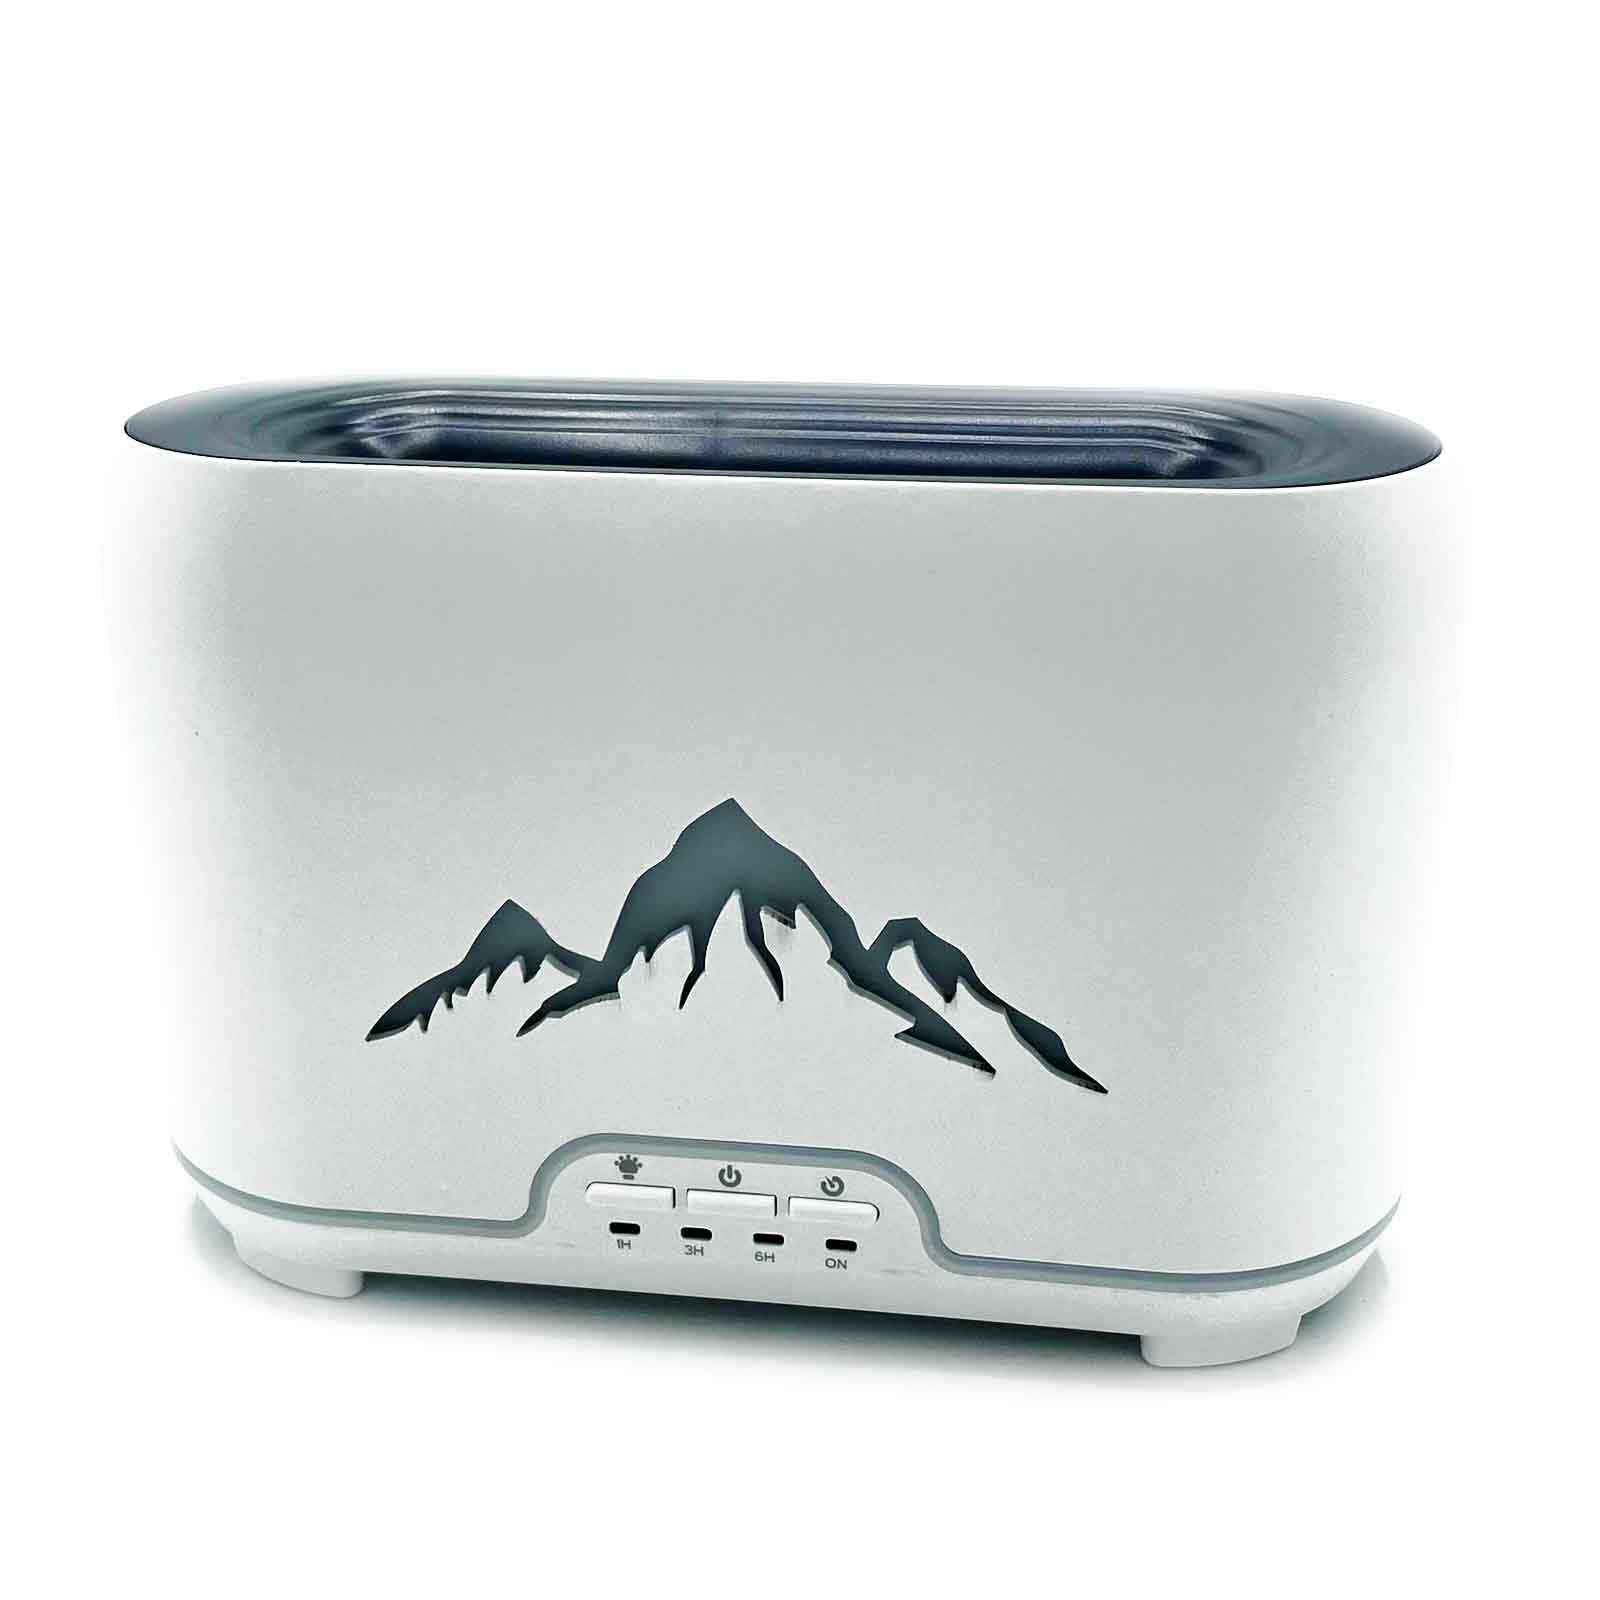 Himalayas Aroma Diffuser - USB-C - Remote control - Flame Effect (Salt included)